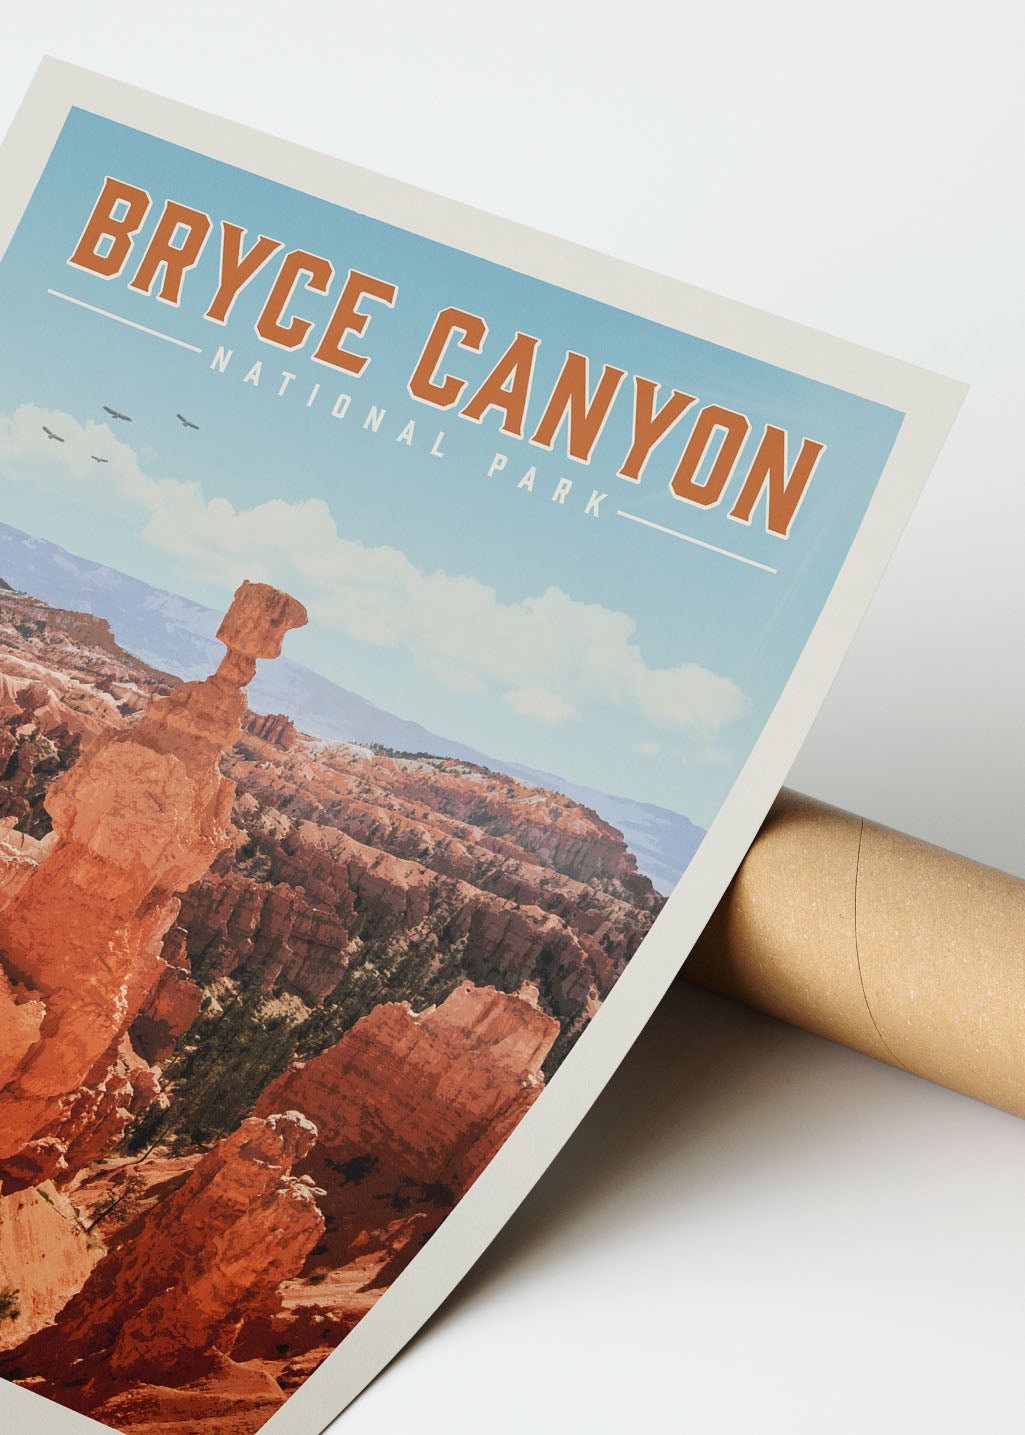 Bryce Canyon Vintage National Park Poster